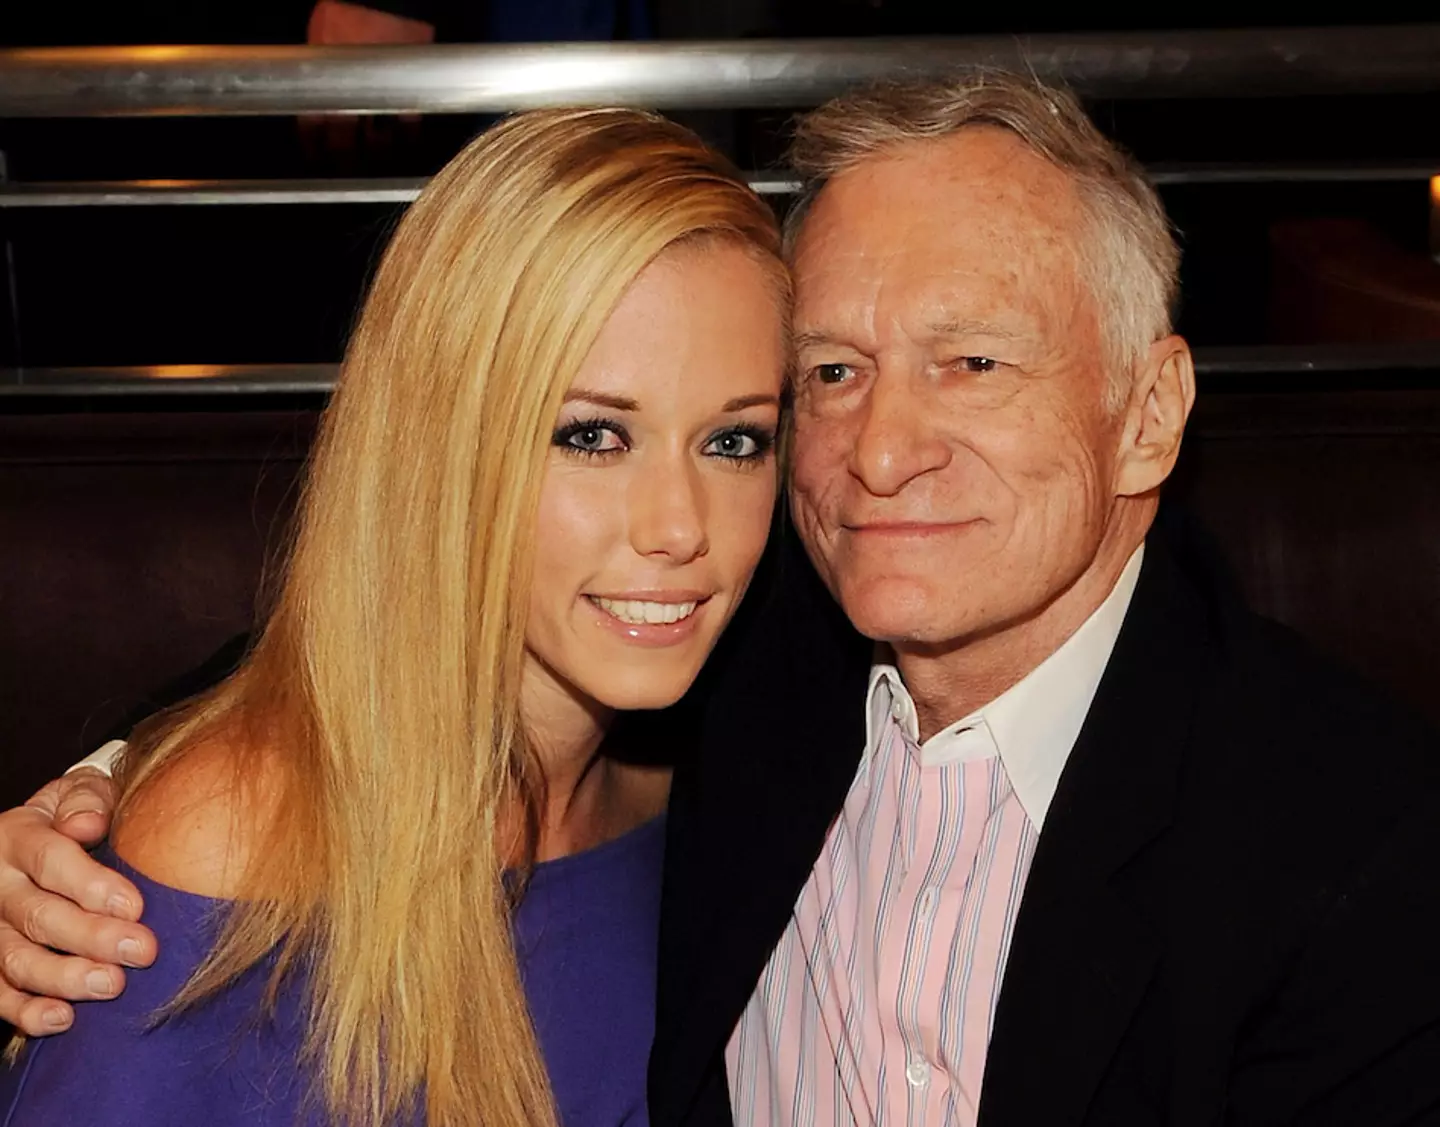 Kendra Wilkinson was only 18 when she became Hefner's girlfriend.